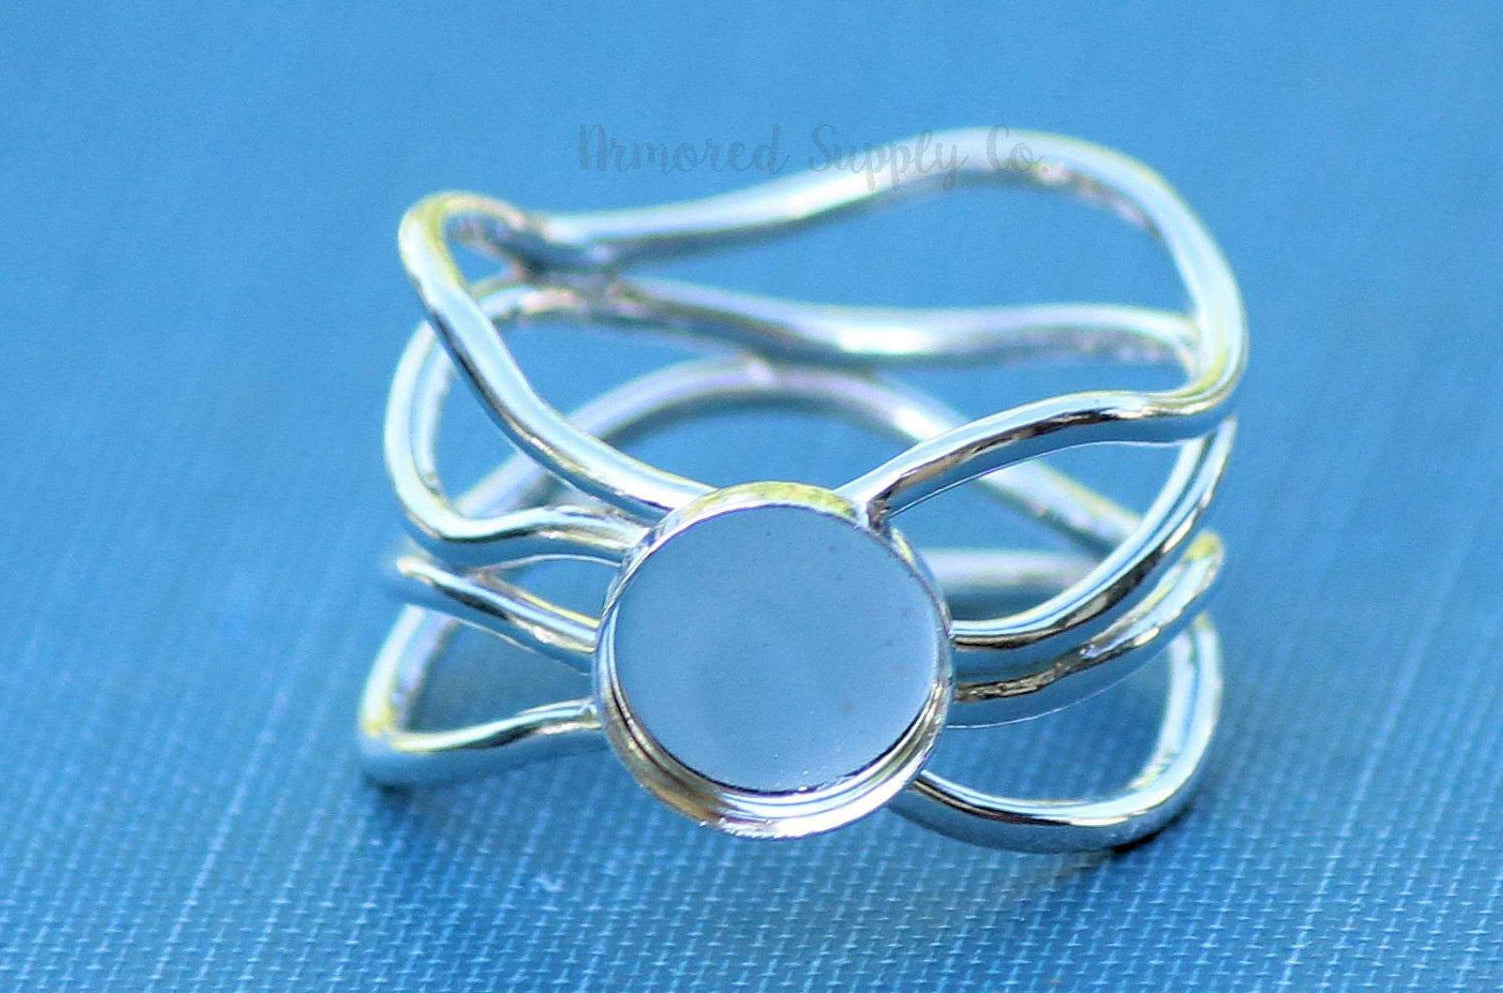 Wide Wave Round Bezel Cup Ring blank, Round Cabochon, Cab, Resin Pad, Breast Milk, DIY jewelry supplies, build your ring, wholesale jewelry